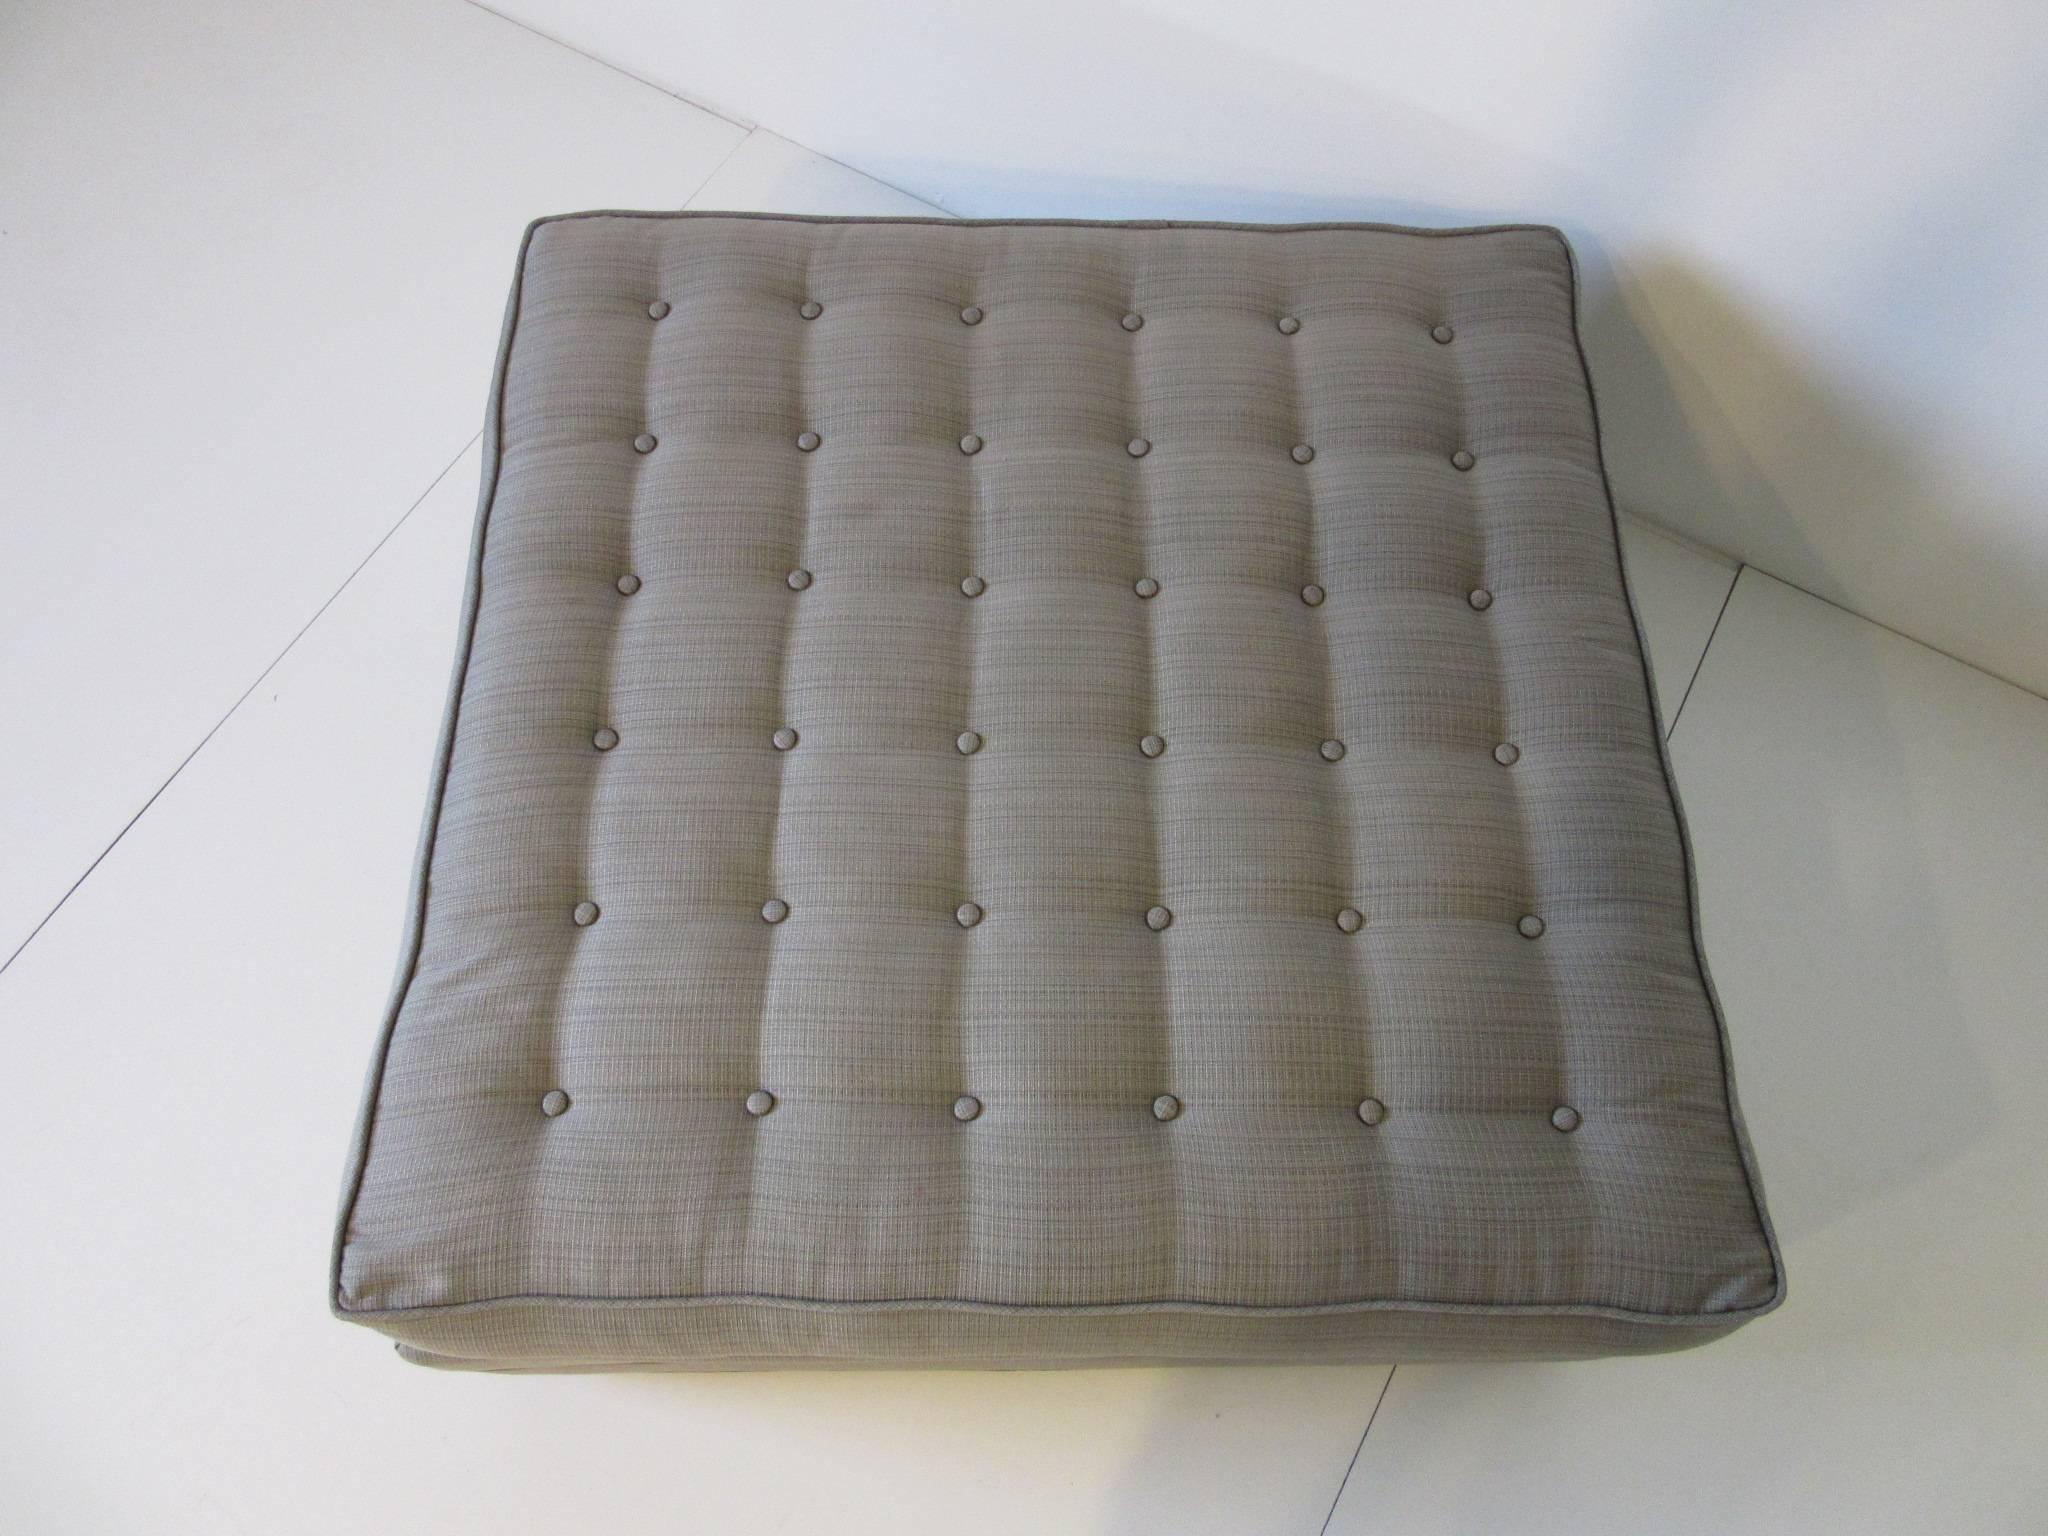 An upholstered button tufted rolling ottoman or footstool manufactured by the Heritage Henredon furniture company for the Taliesin collection.